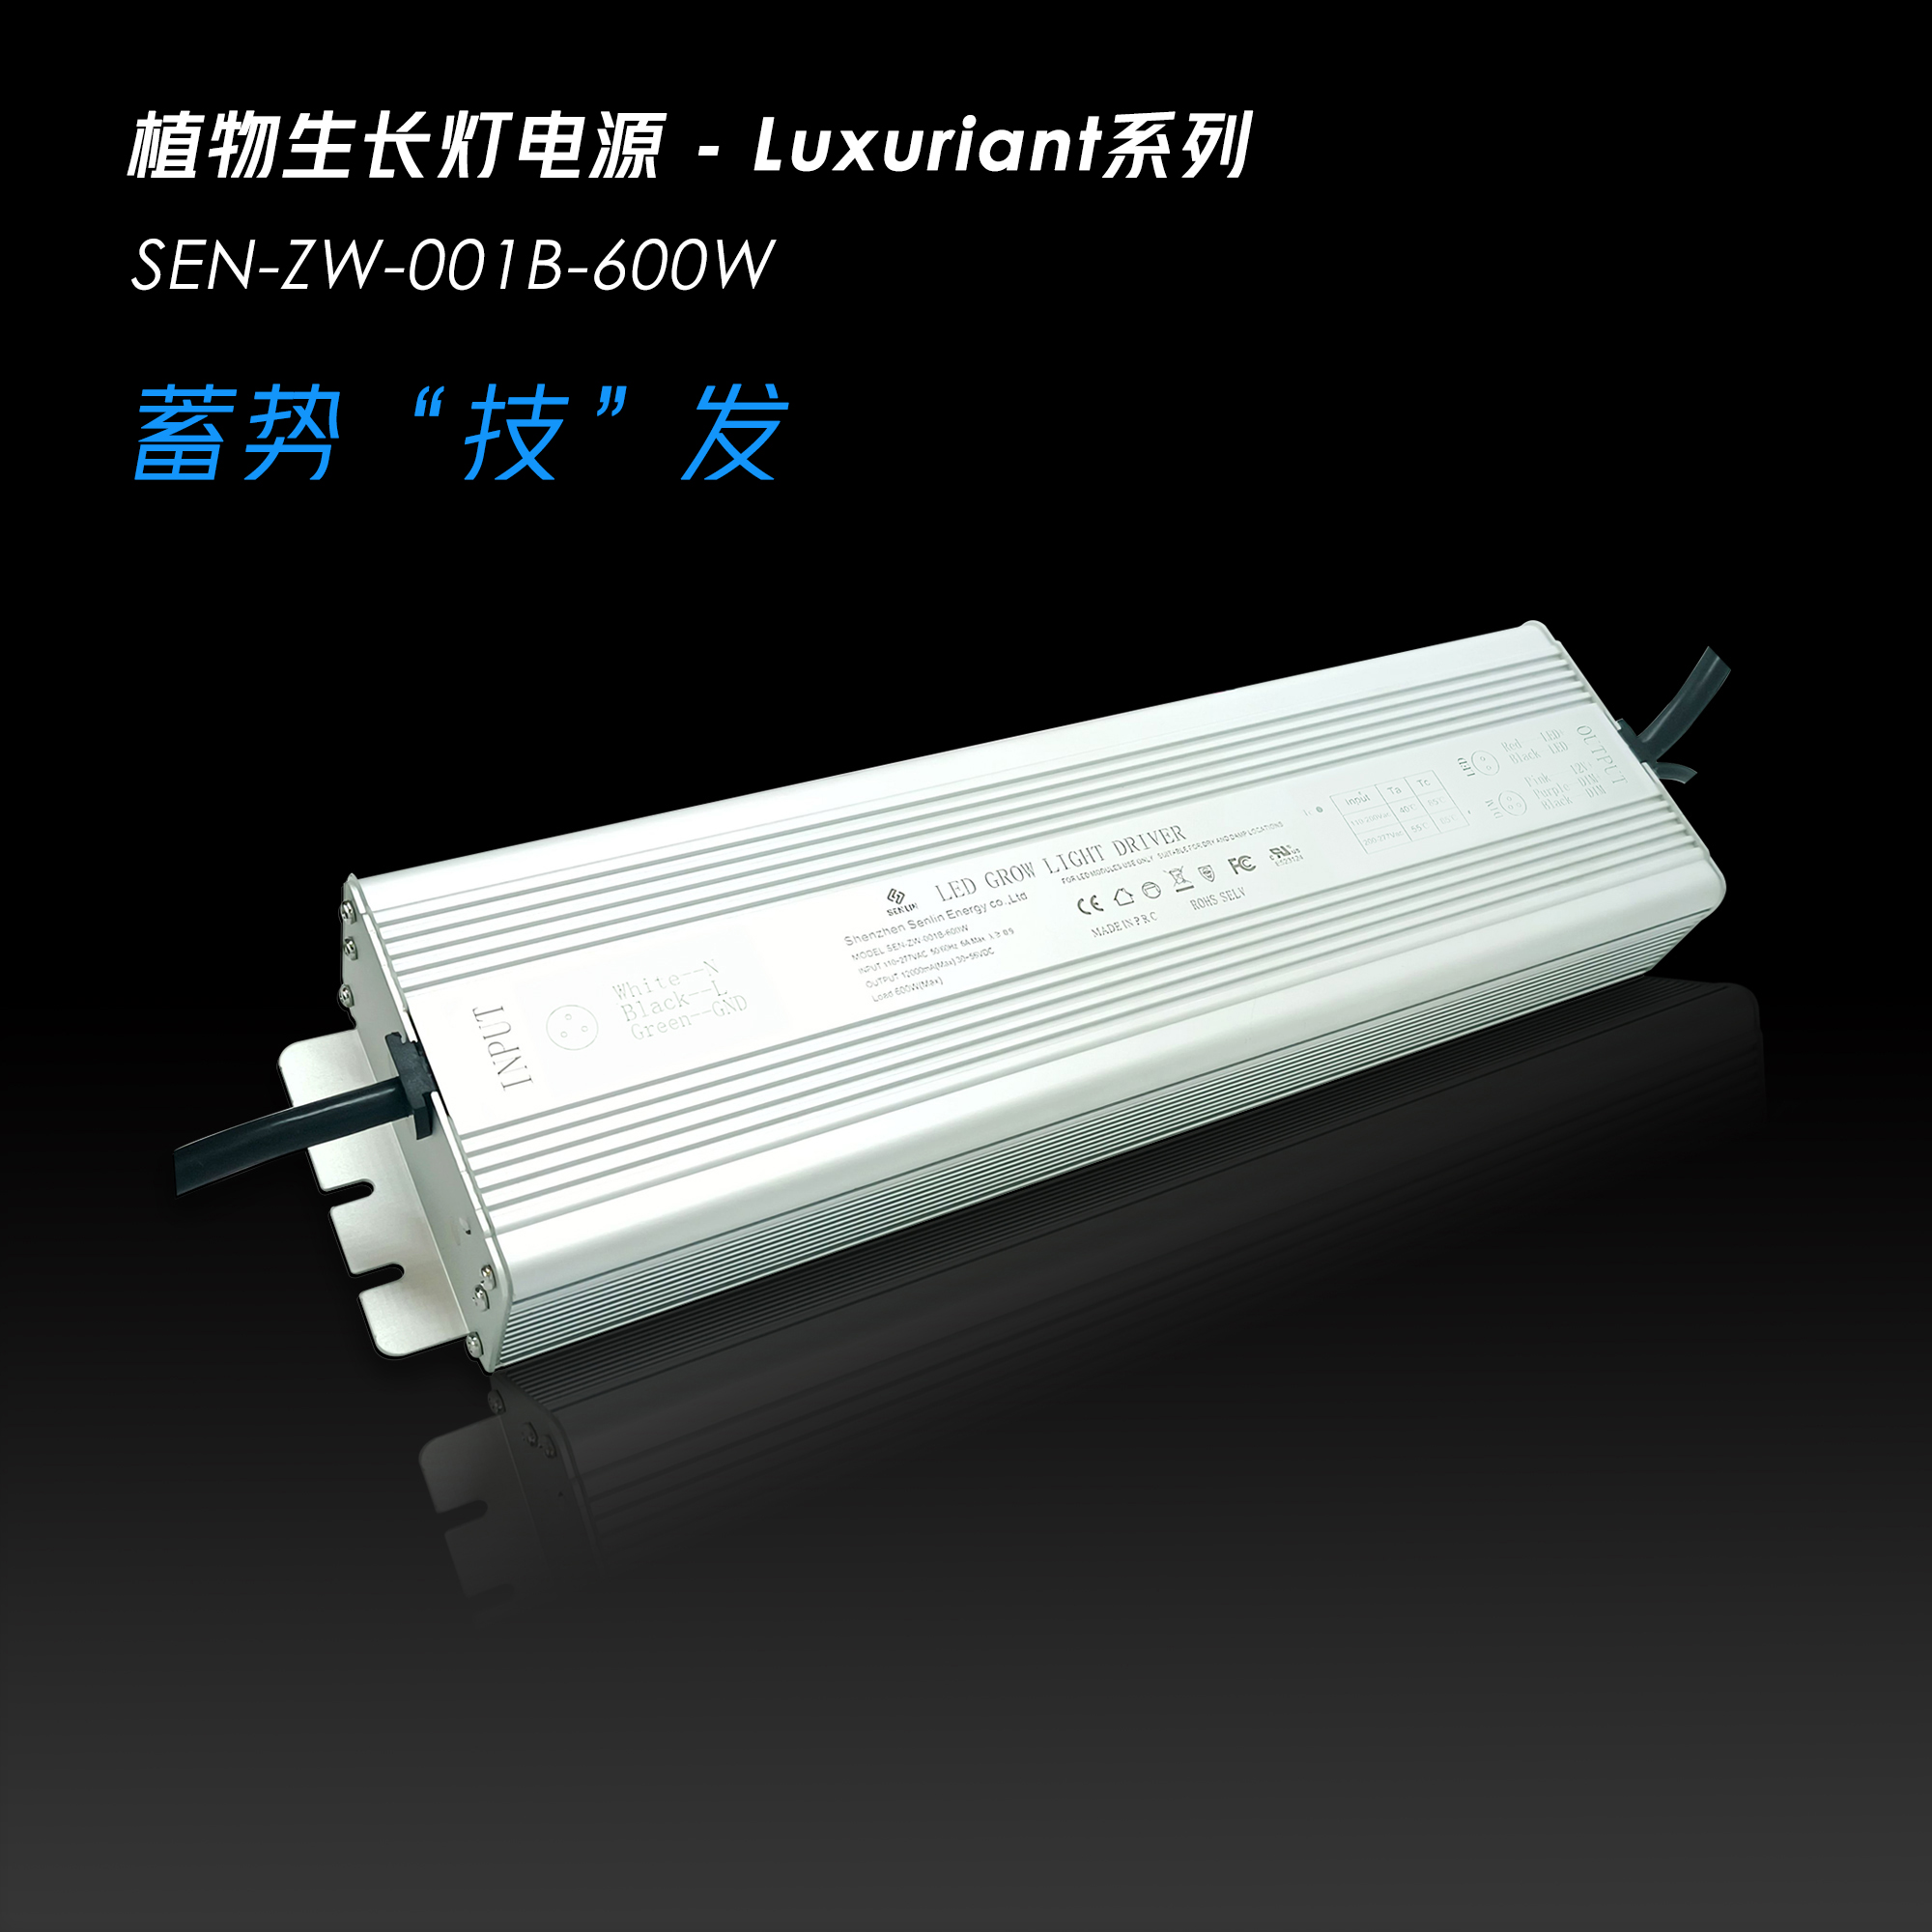 Dimmable LED constant current drive power supply